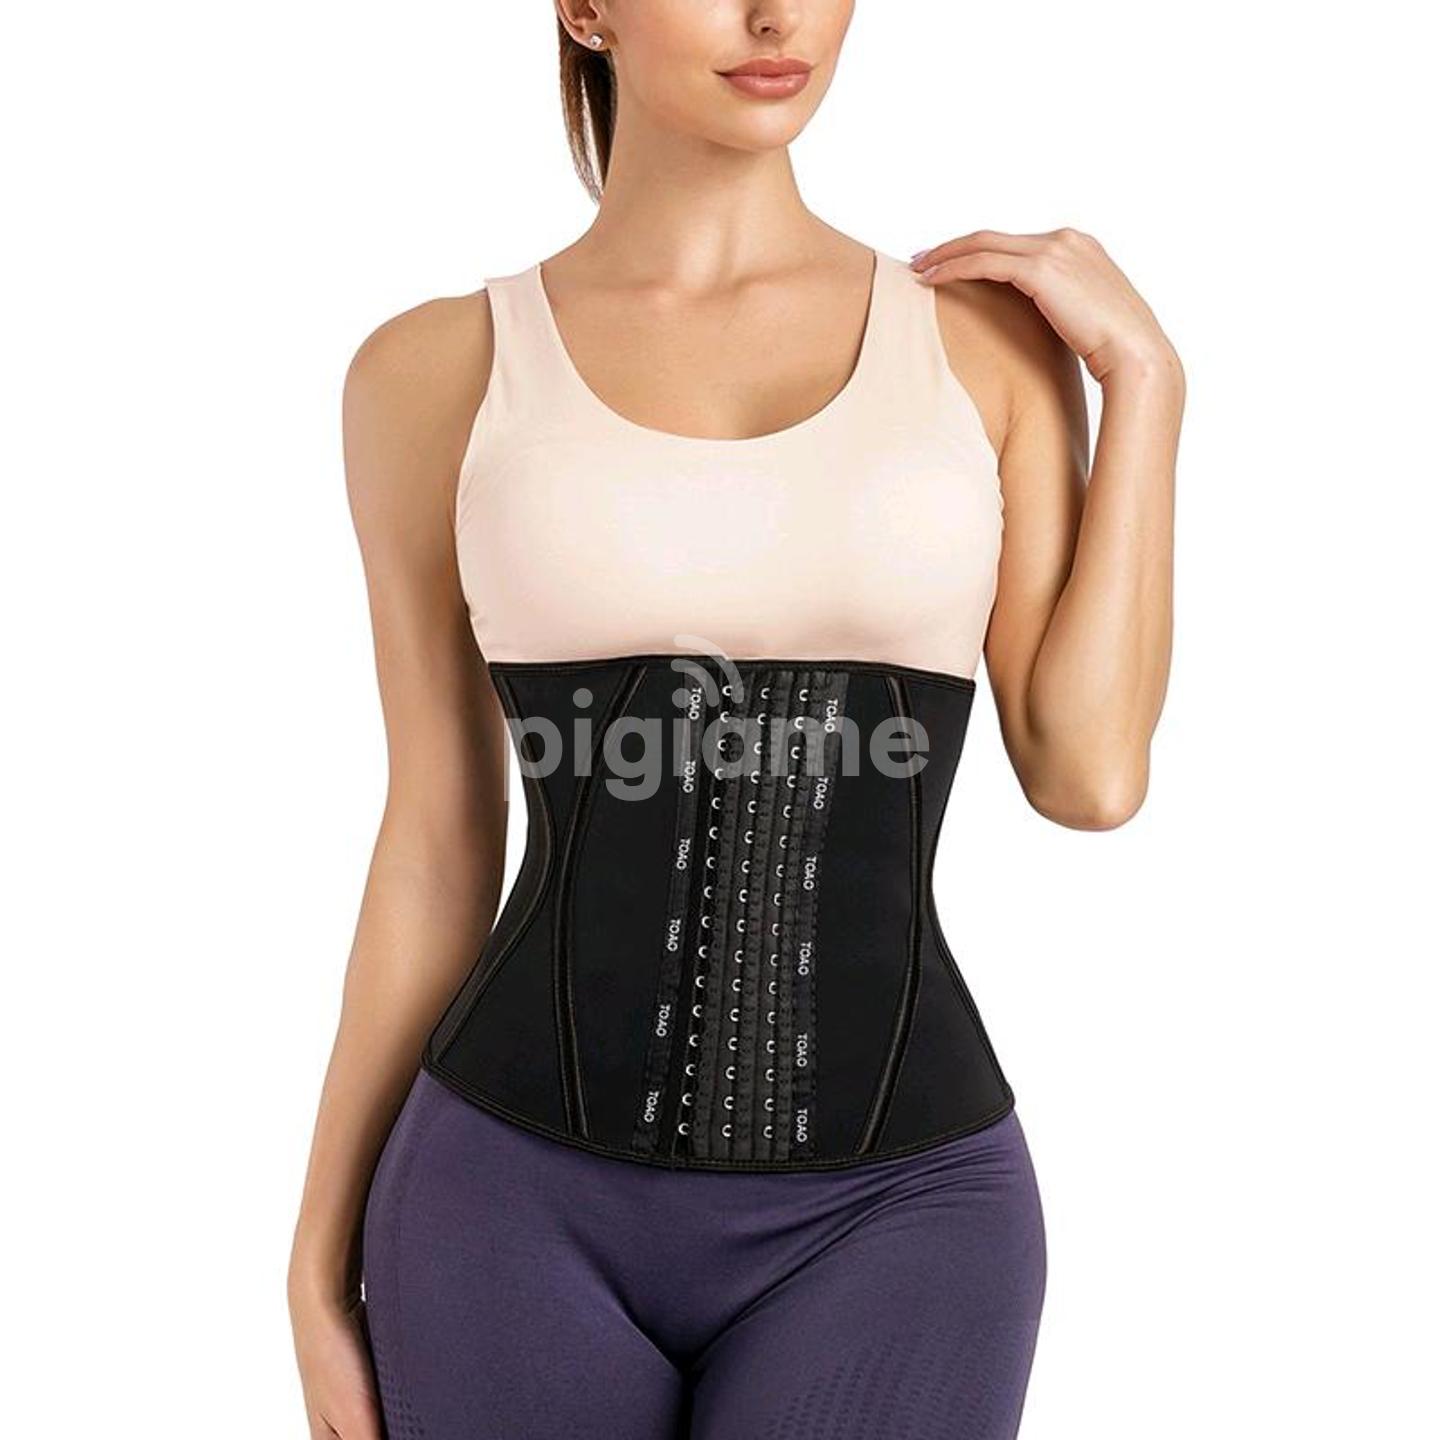 Colombian Tummy Control Corset 13 X-Shaped Slimming Belt in